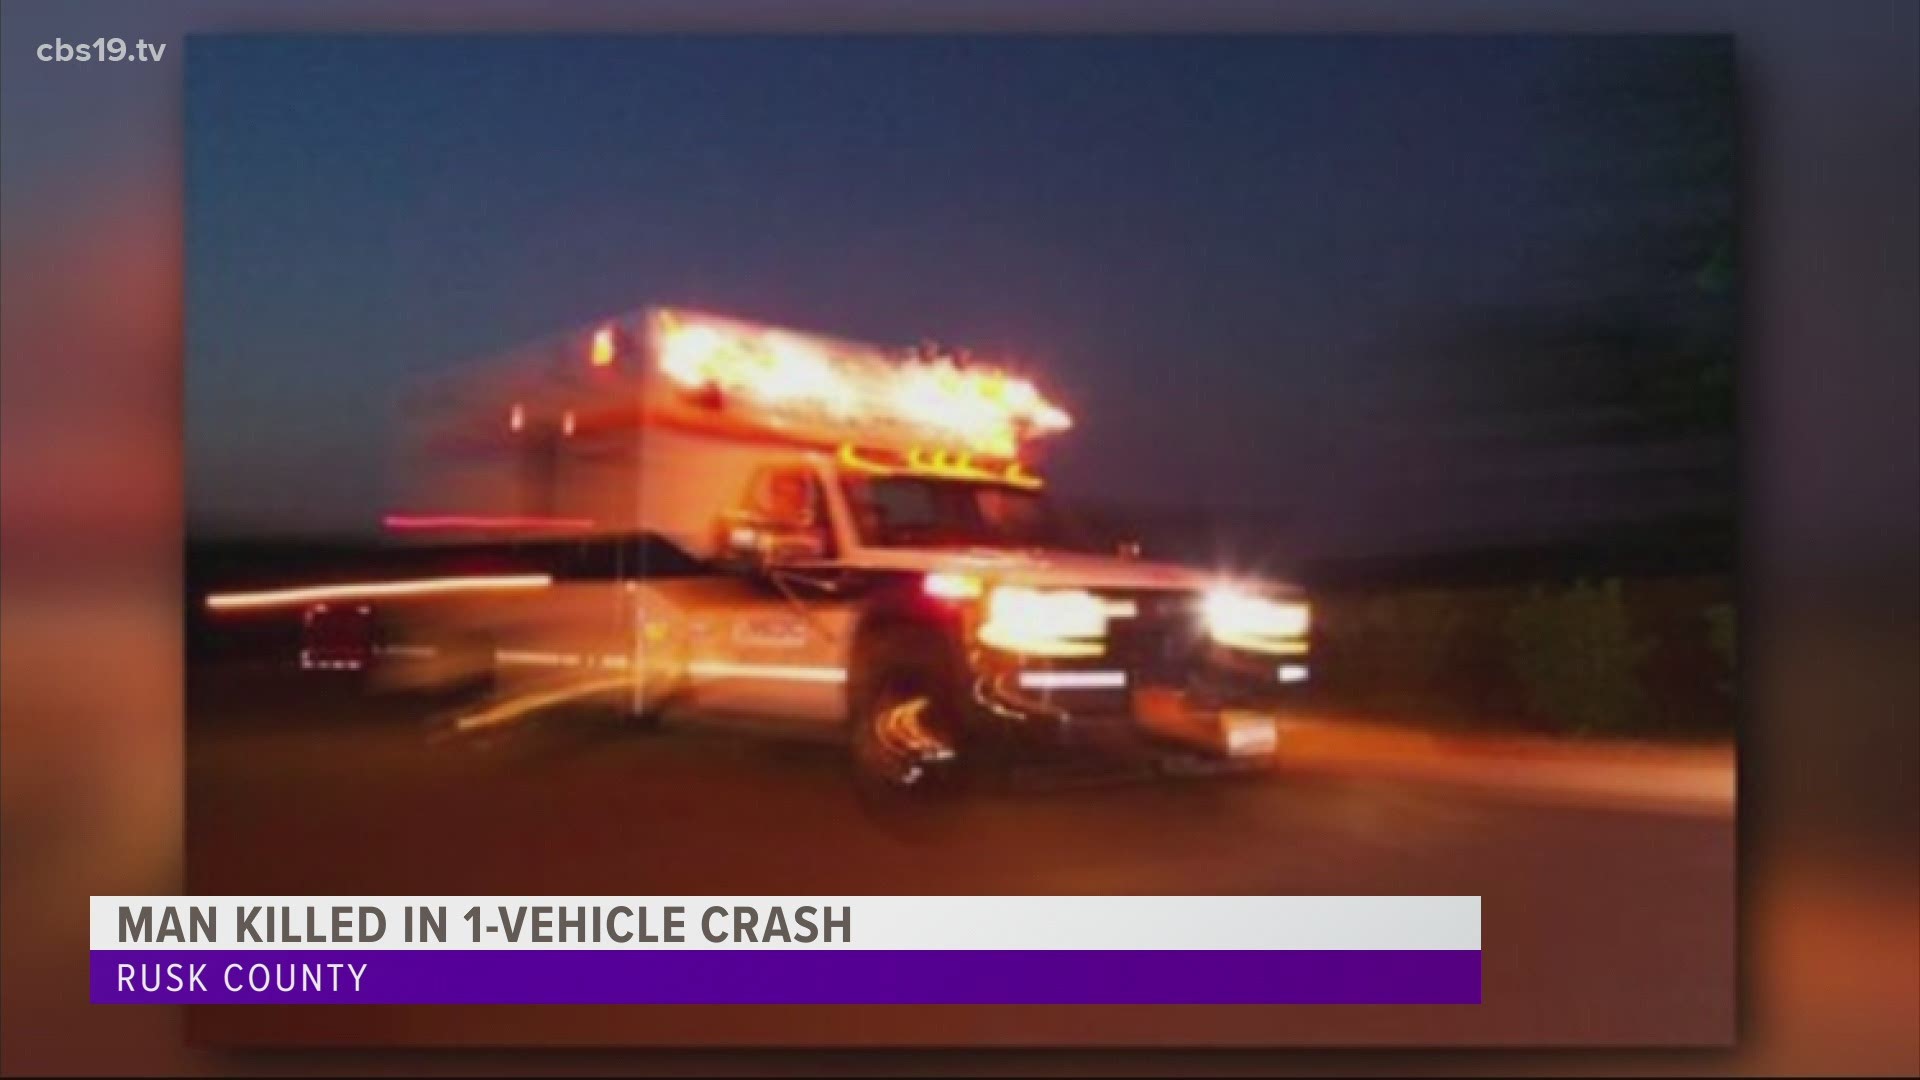 The Texas Department of Public Safety (DPS) is investigating a one-vehicle crash that resulted in the death of a man Monday evening in Rusk County.